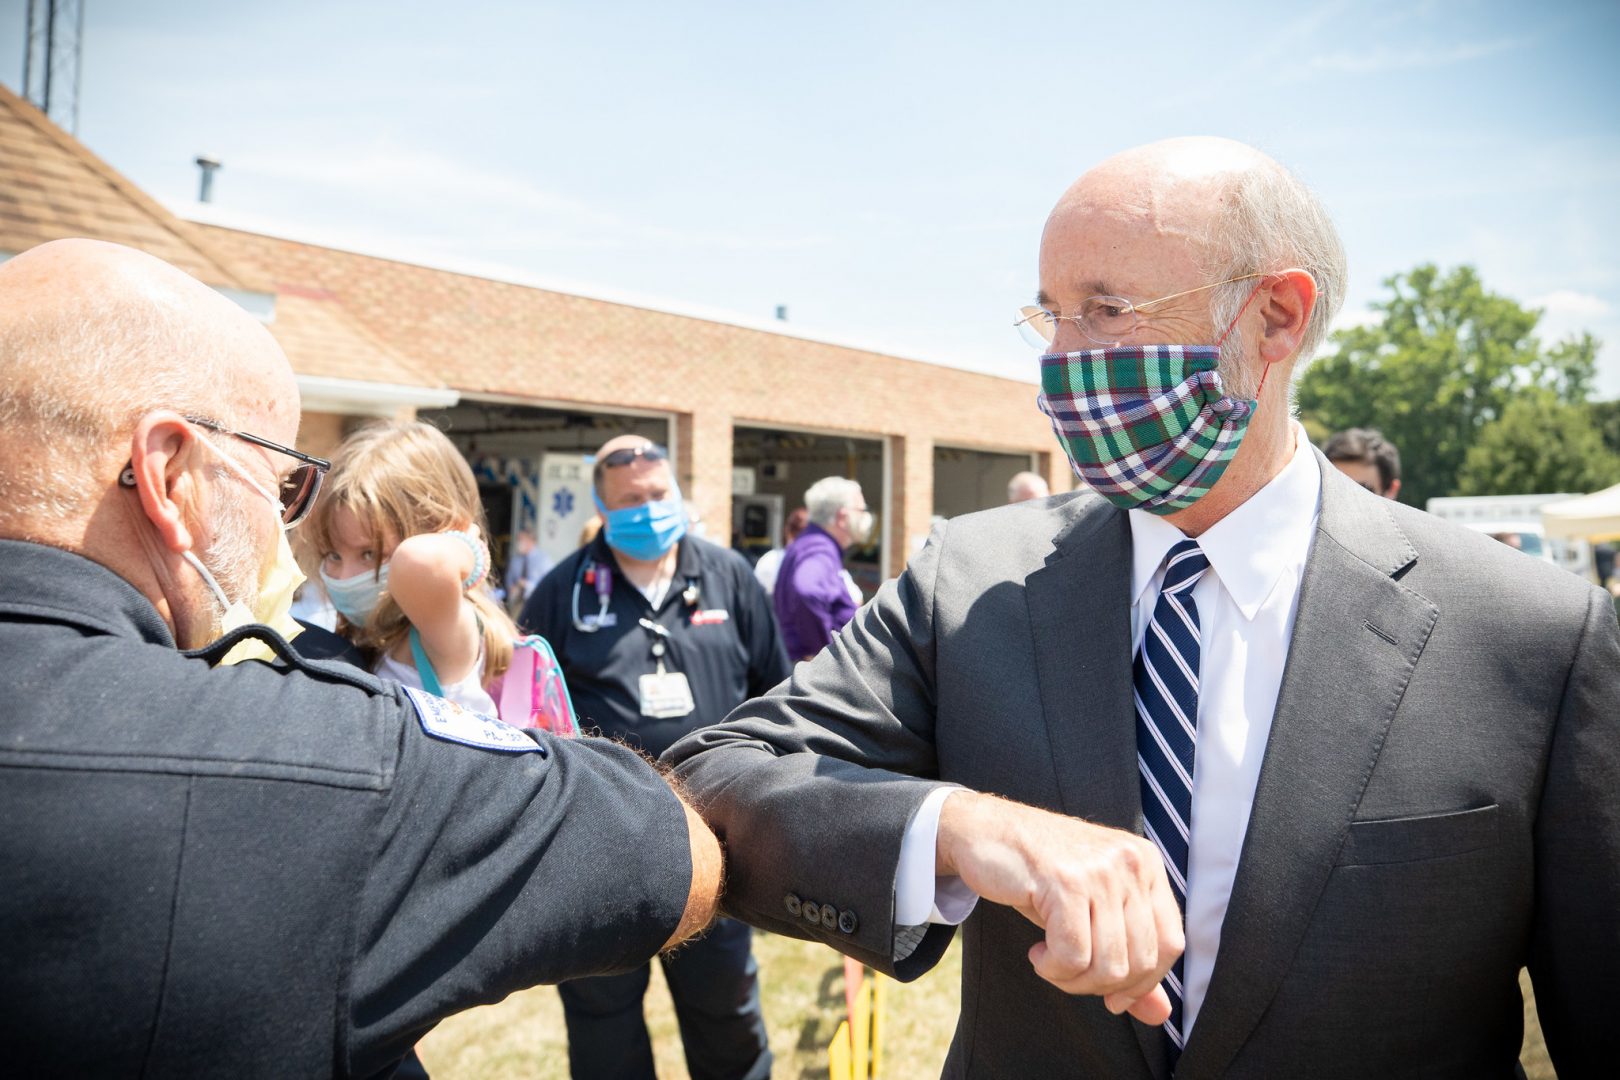 Gov. Tom Wolf visited the Millersville location of Lancaster EMS on July 30, 2020, to thank first responders and learn about how they are adapting their critical work during the state’s response to the COVID-19 pandemic. 